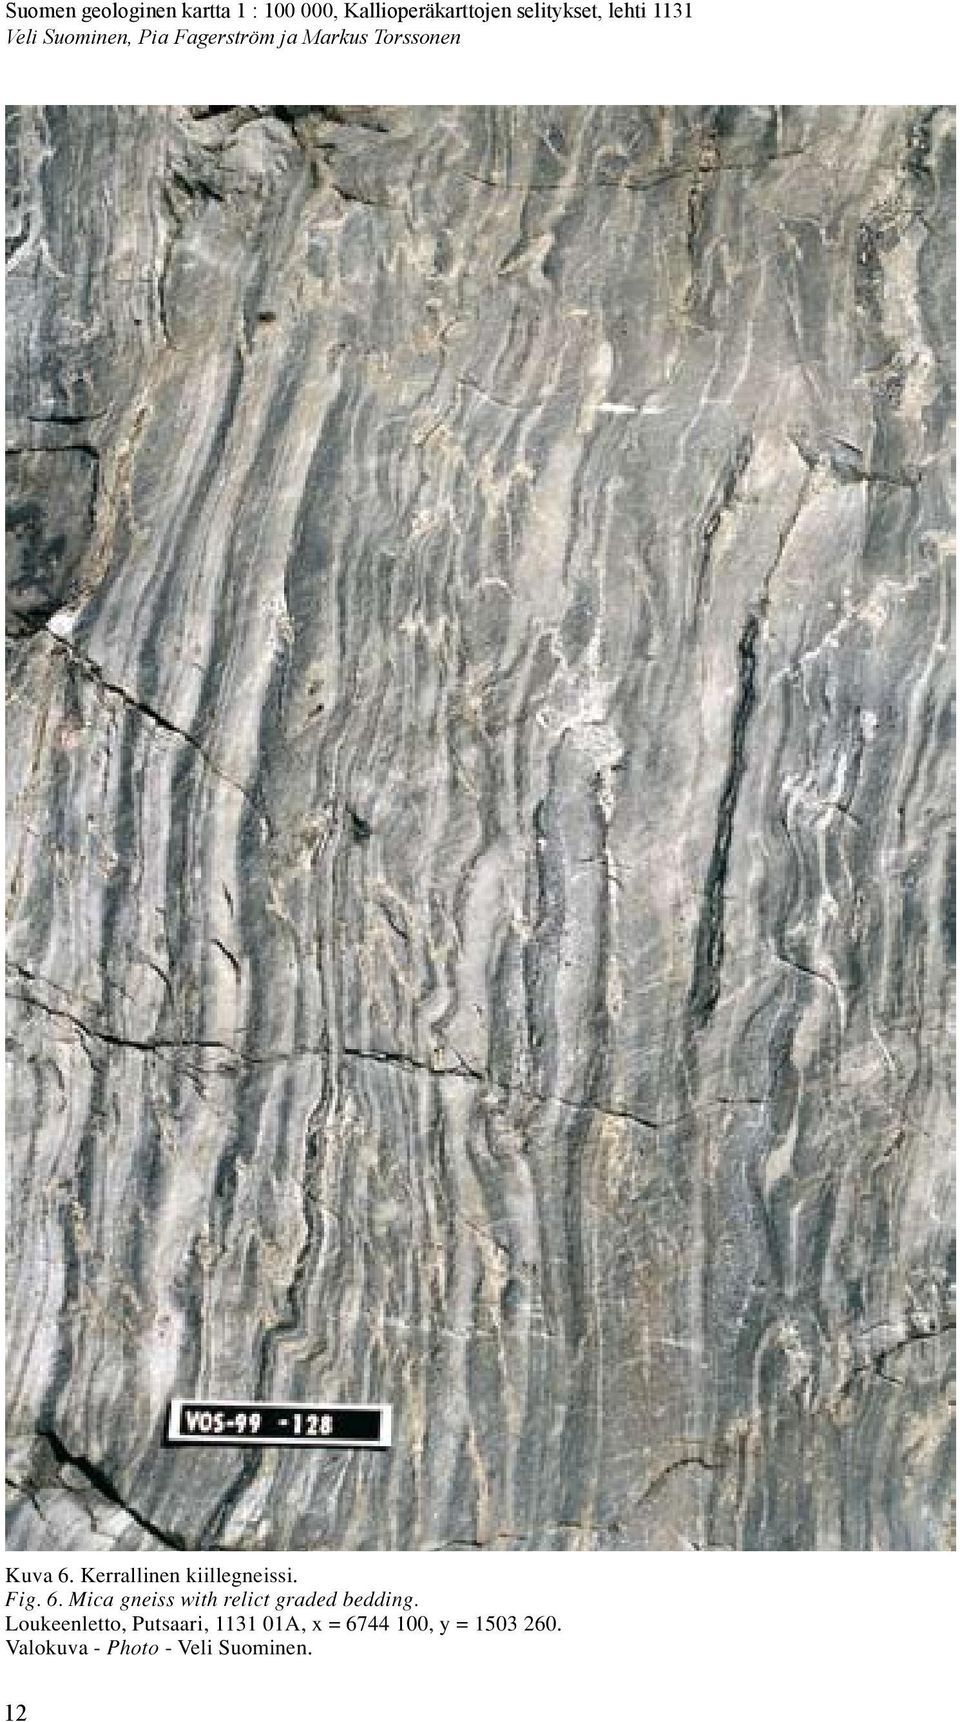 Mica gneiss with relict graded bedding.